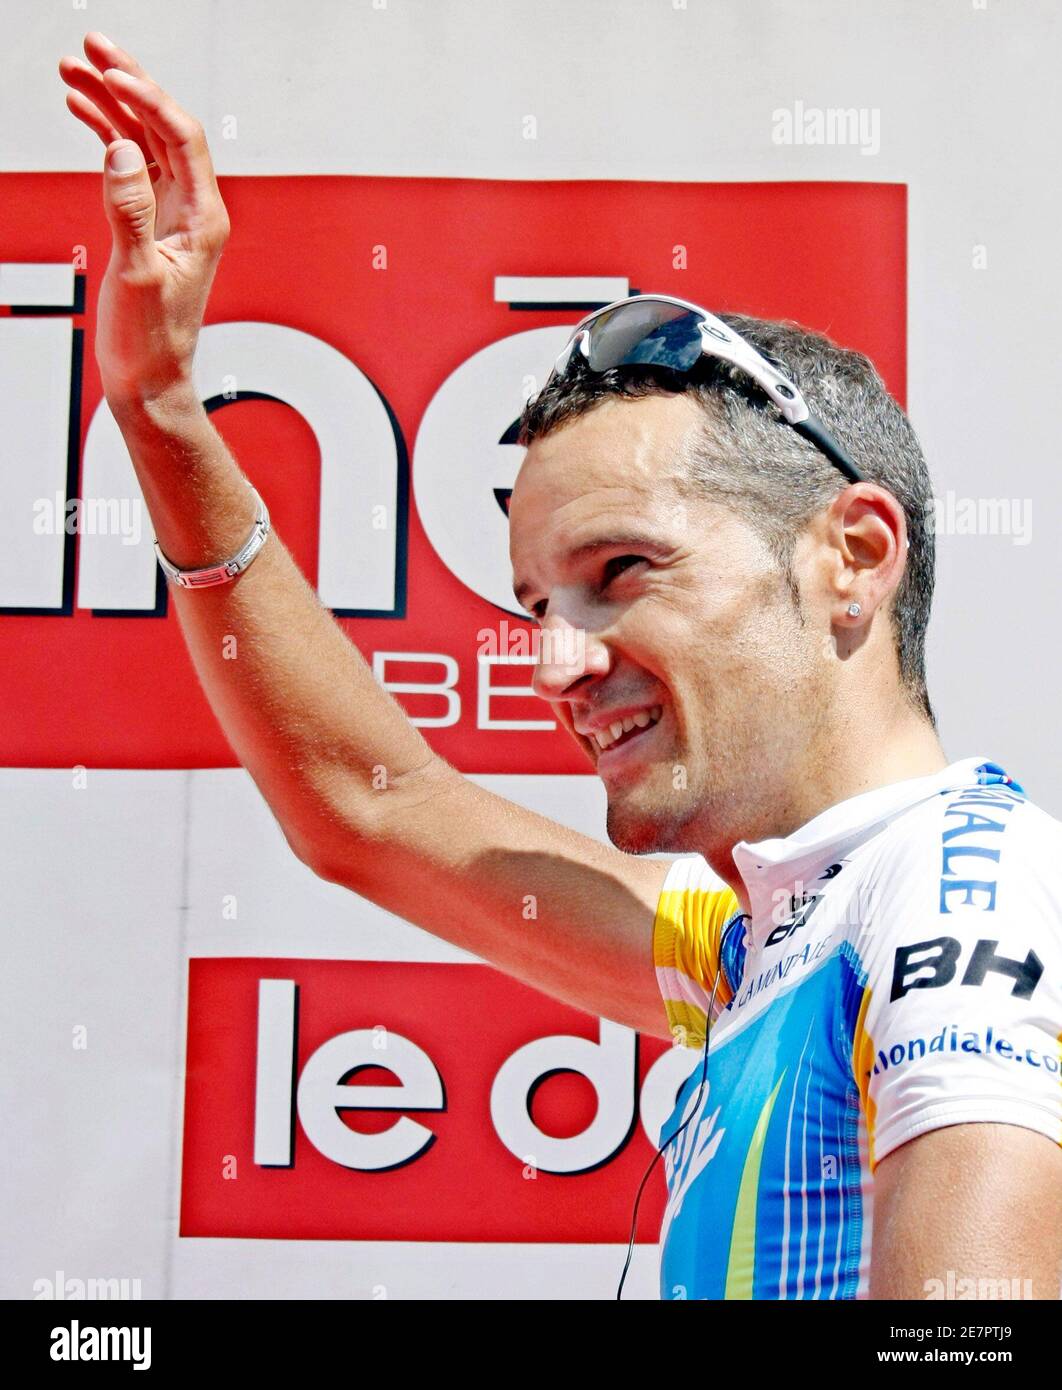 Cyril Dessel of France waves on the podium after winning the fourth stage of the Dauphine cycling race between Vienne and Annemasse, in Annemasse, French Alps June 12, 2008.    REUTERS/Robert Pratta (FRANCE) Stock Photo